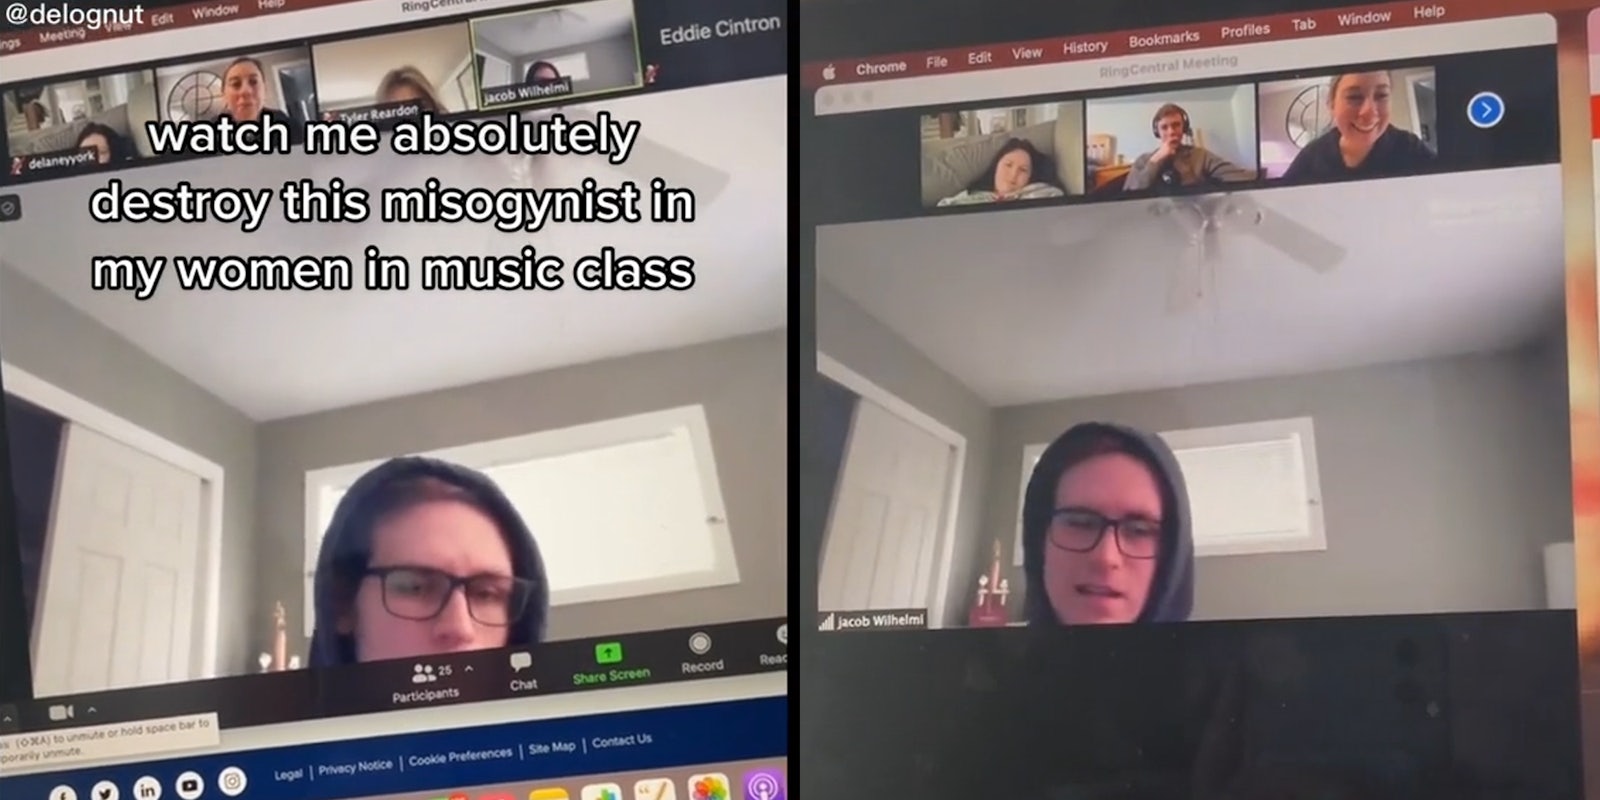 young man in room on teleconference software with caption 'watch me absolutely destroy this misogynist in my women in music class'